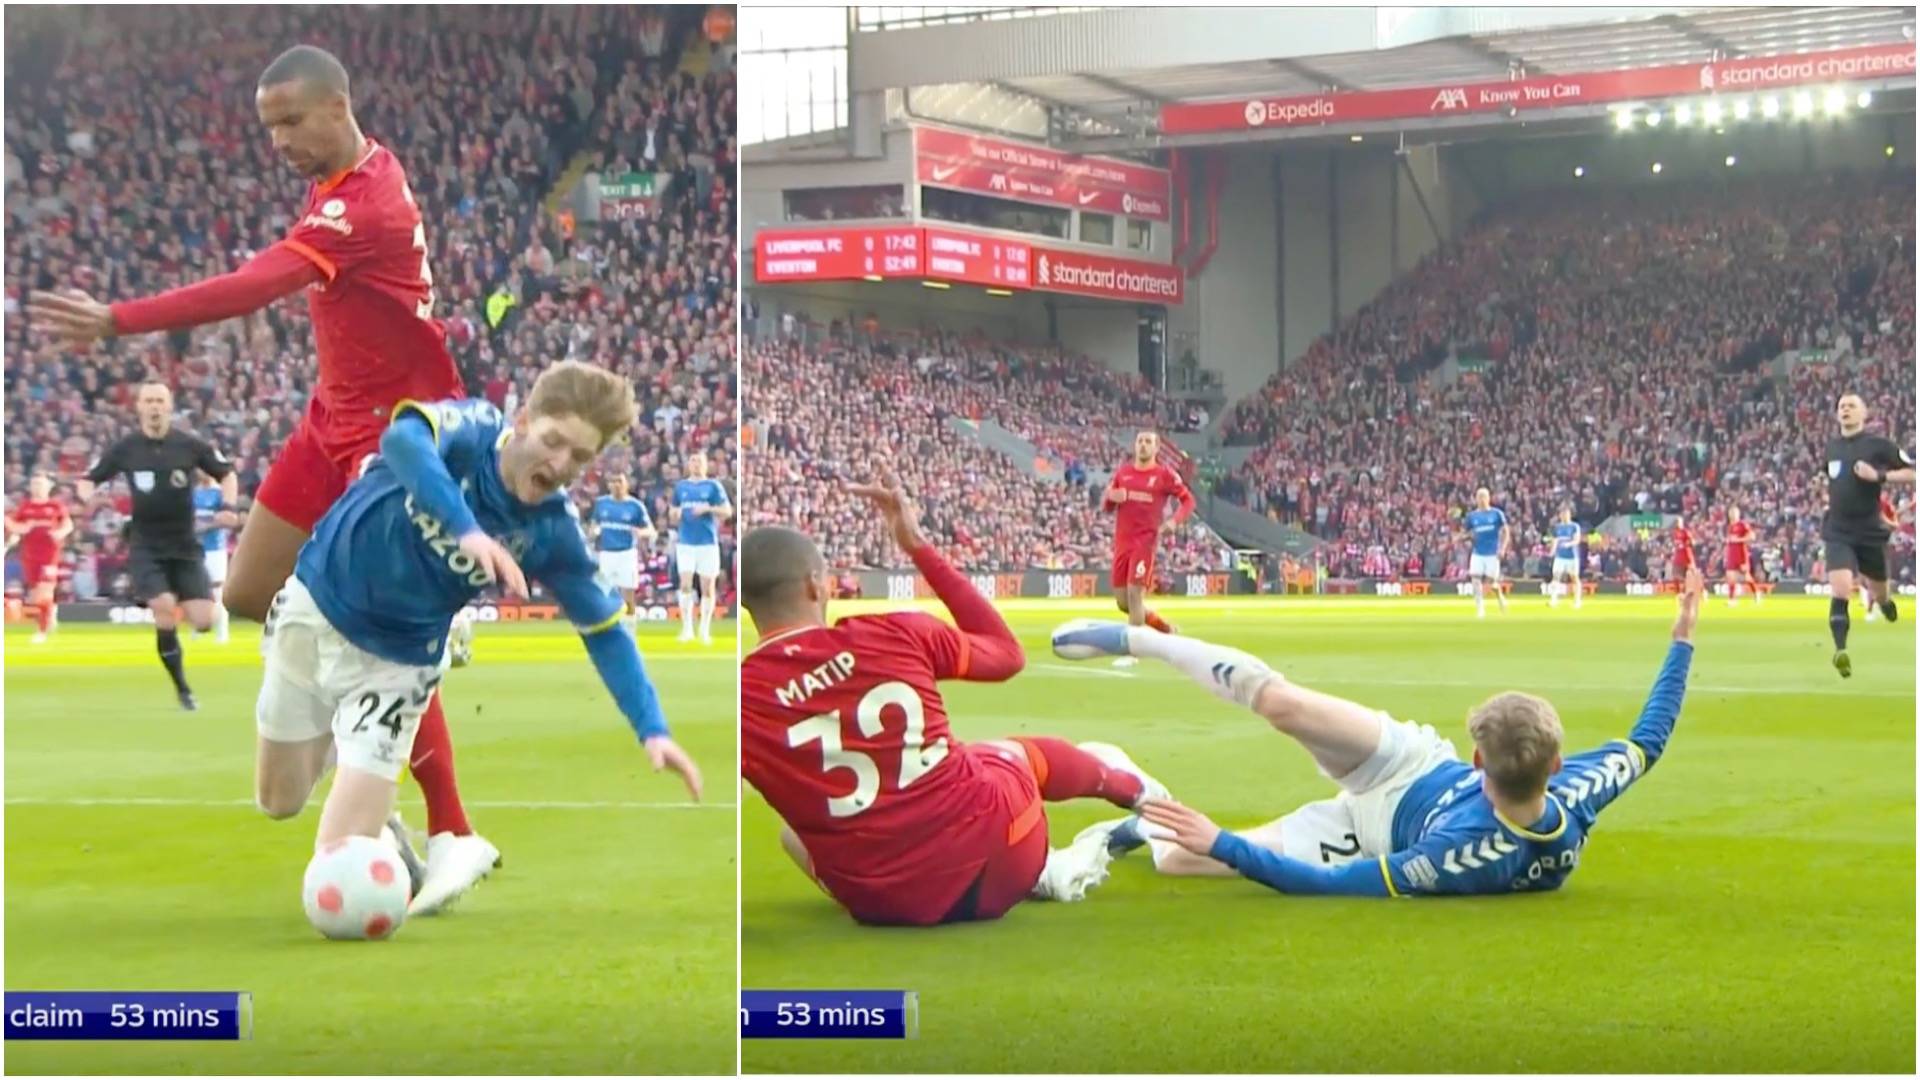 Everton demand full explanation after being denied penalty during 2-0 defeat vs Liverpool